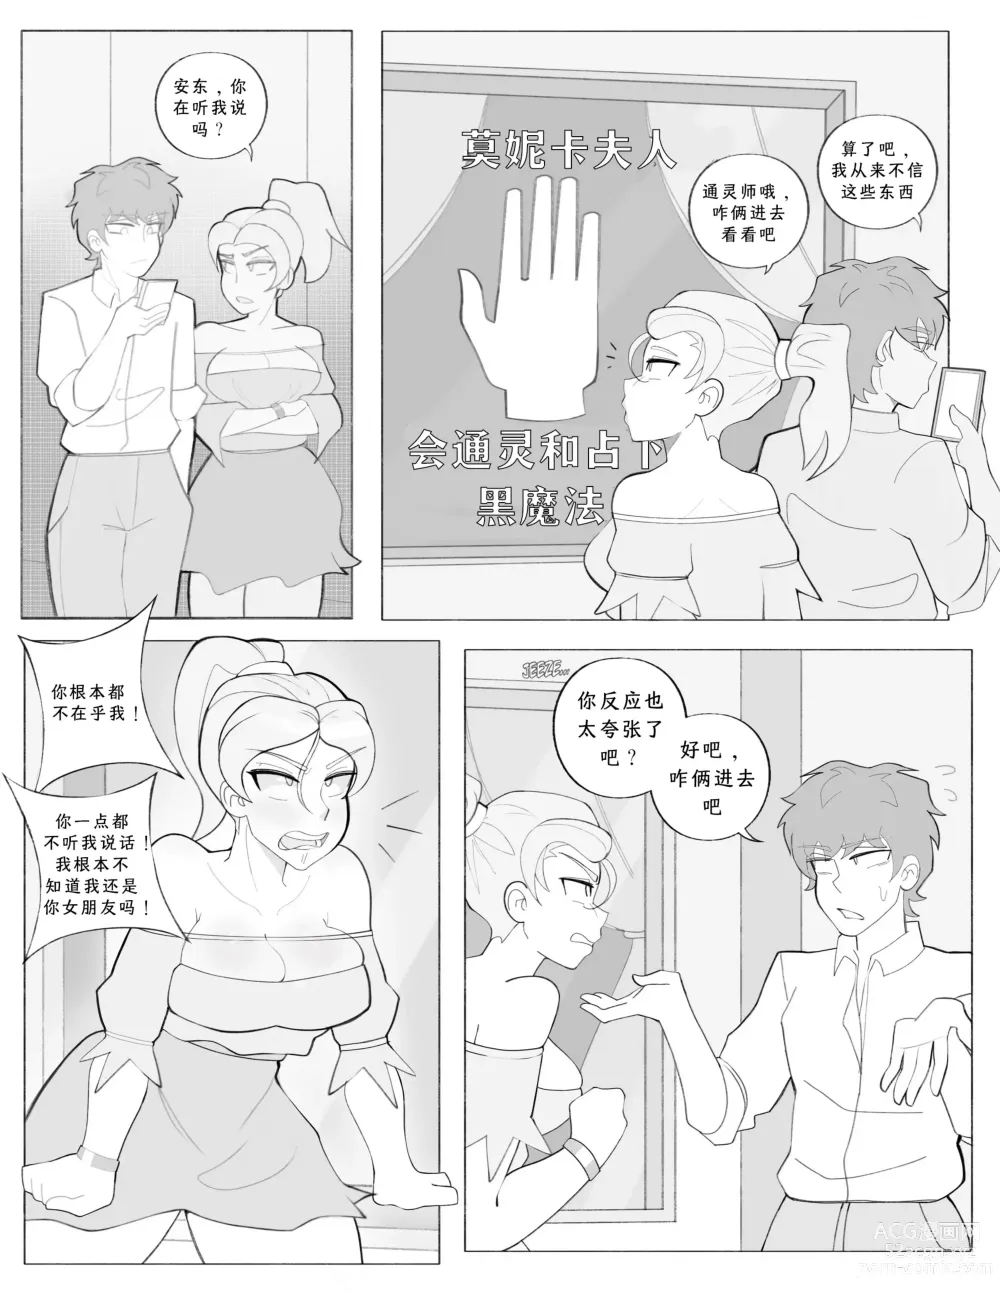 Page 2 of doujinshi A Twist Of Fortune (Vol. 1)!